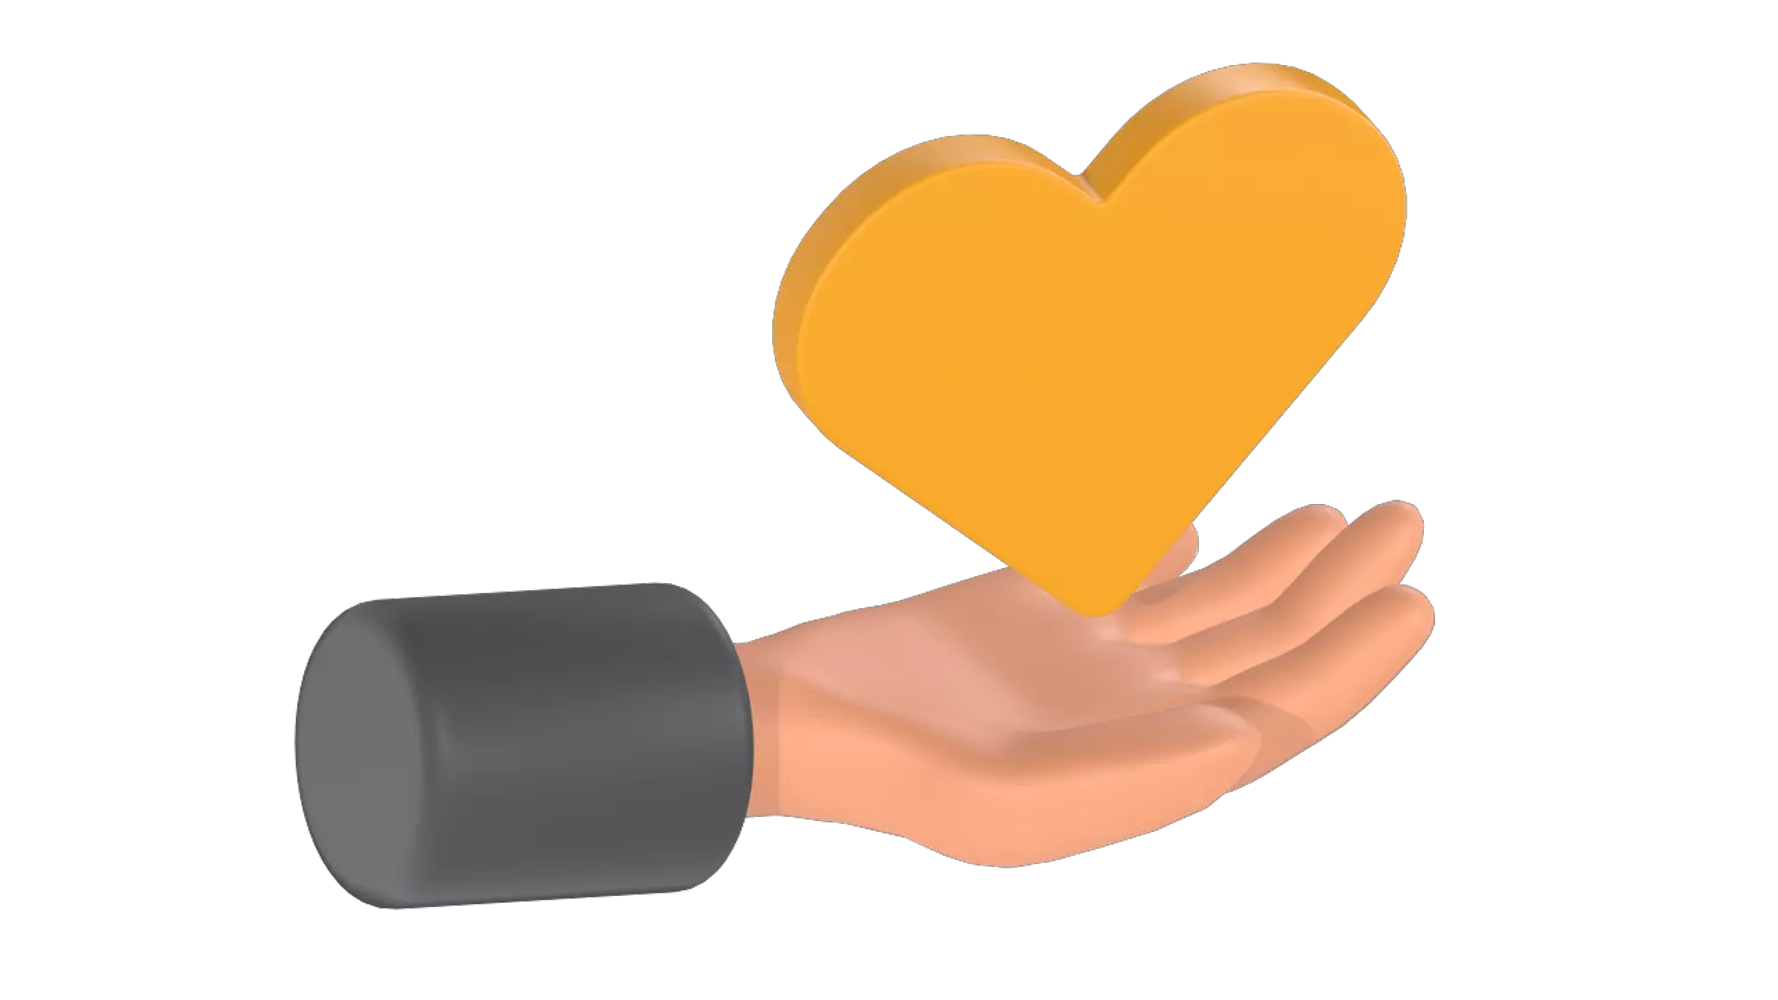 Give Love Hand Gesture 3D Graphic